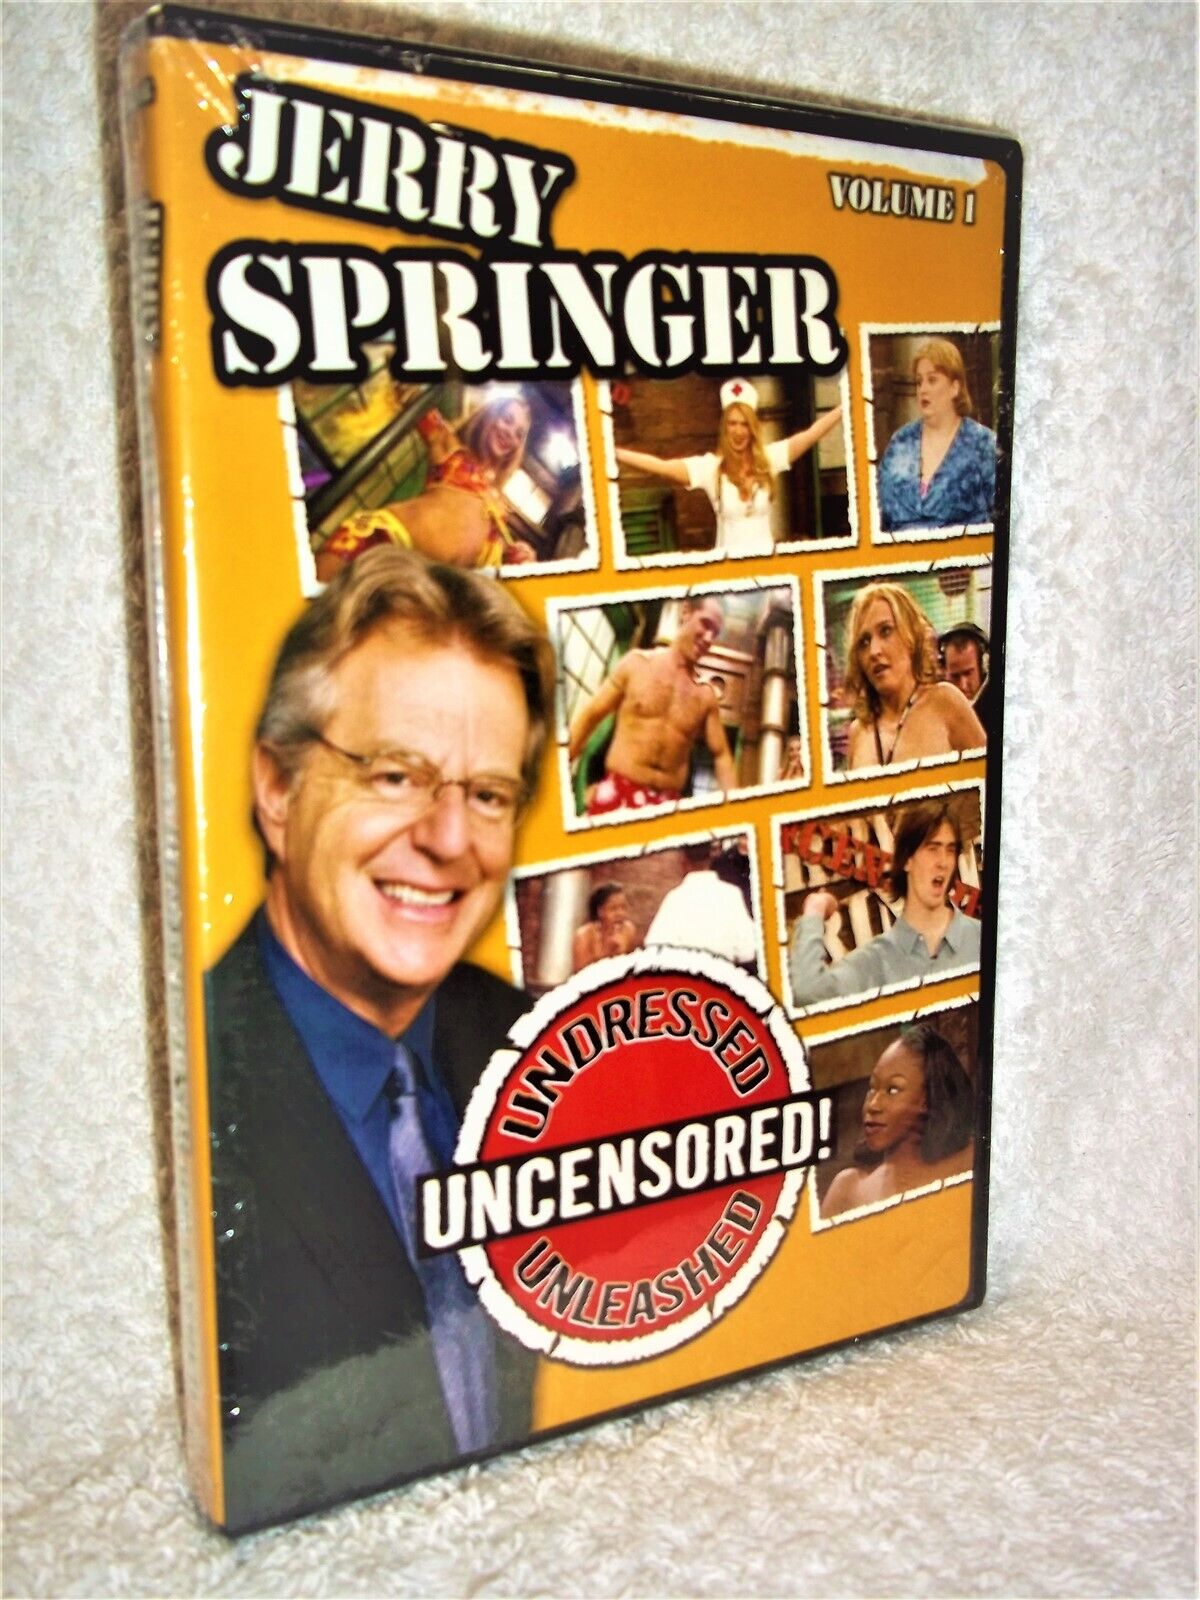 david malle recommends Jerry Springer Uncensored Clips